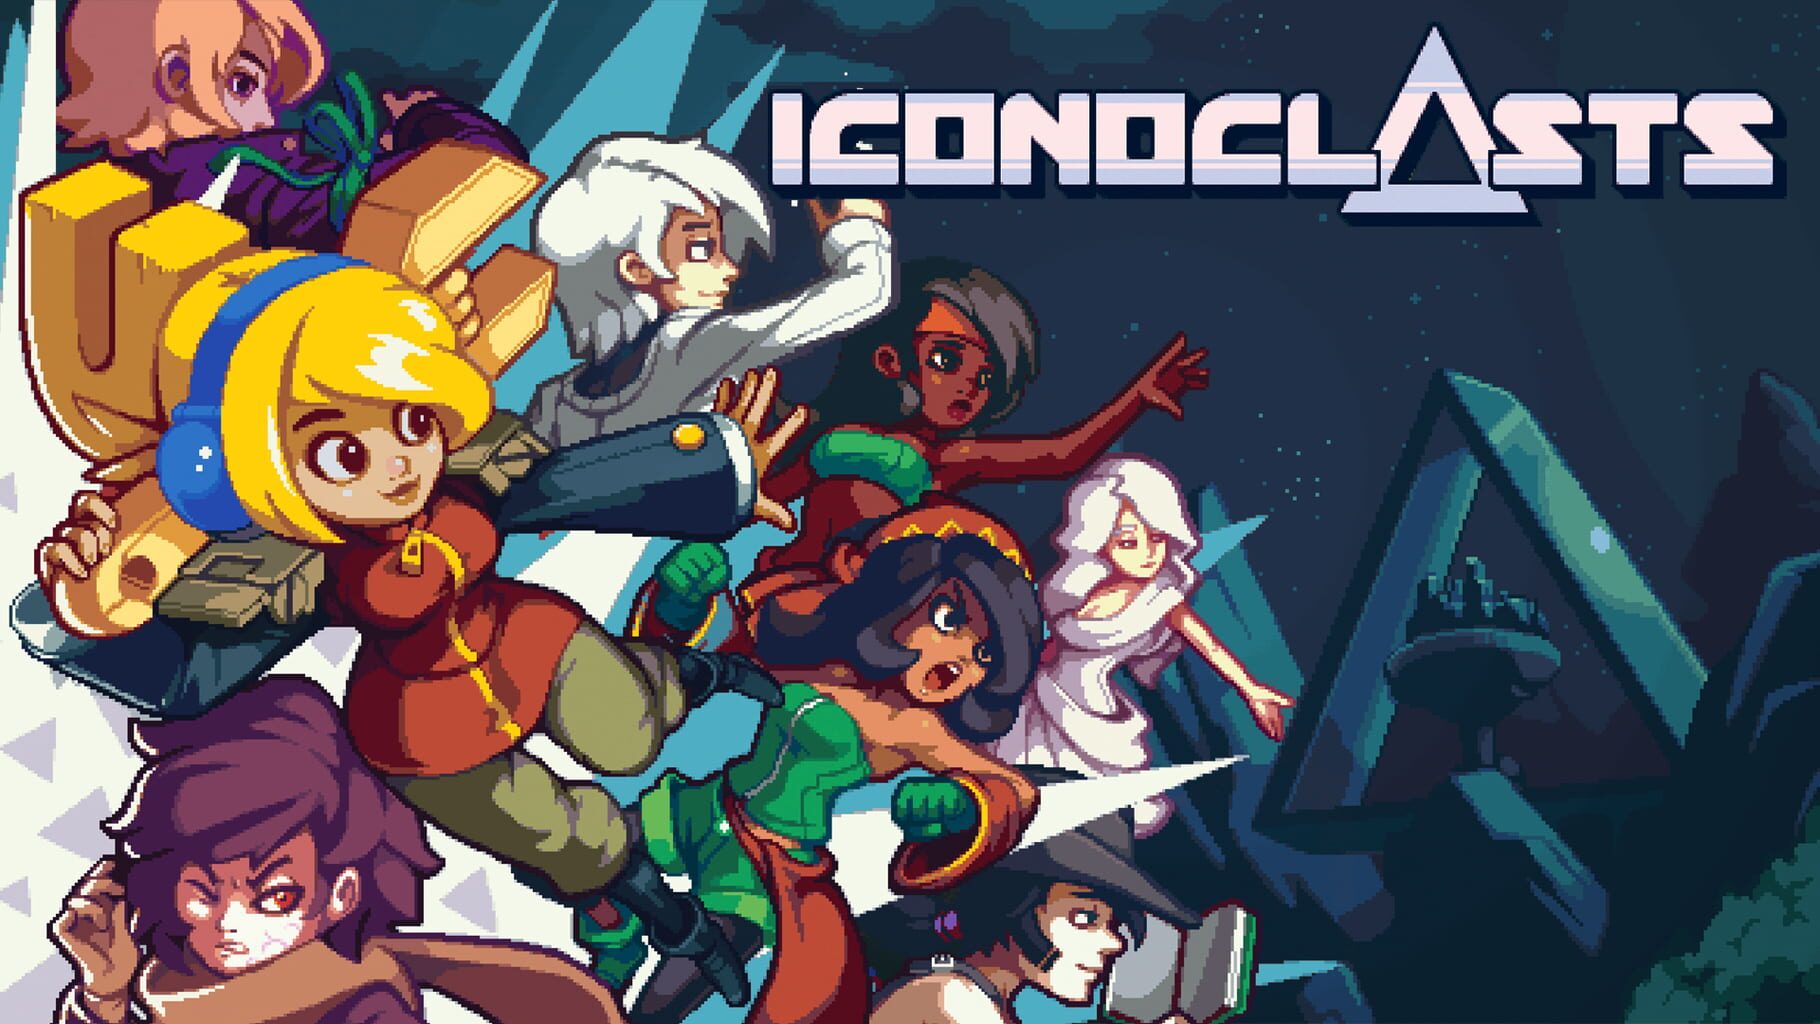 Artwork for Iconoclasts